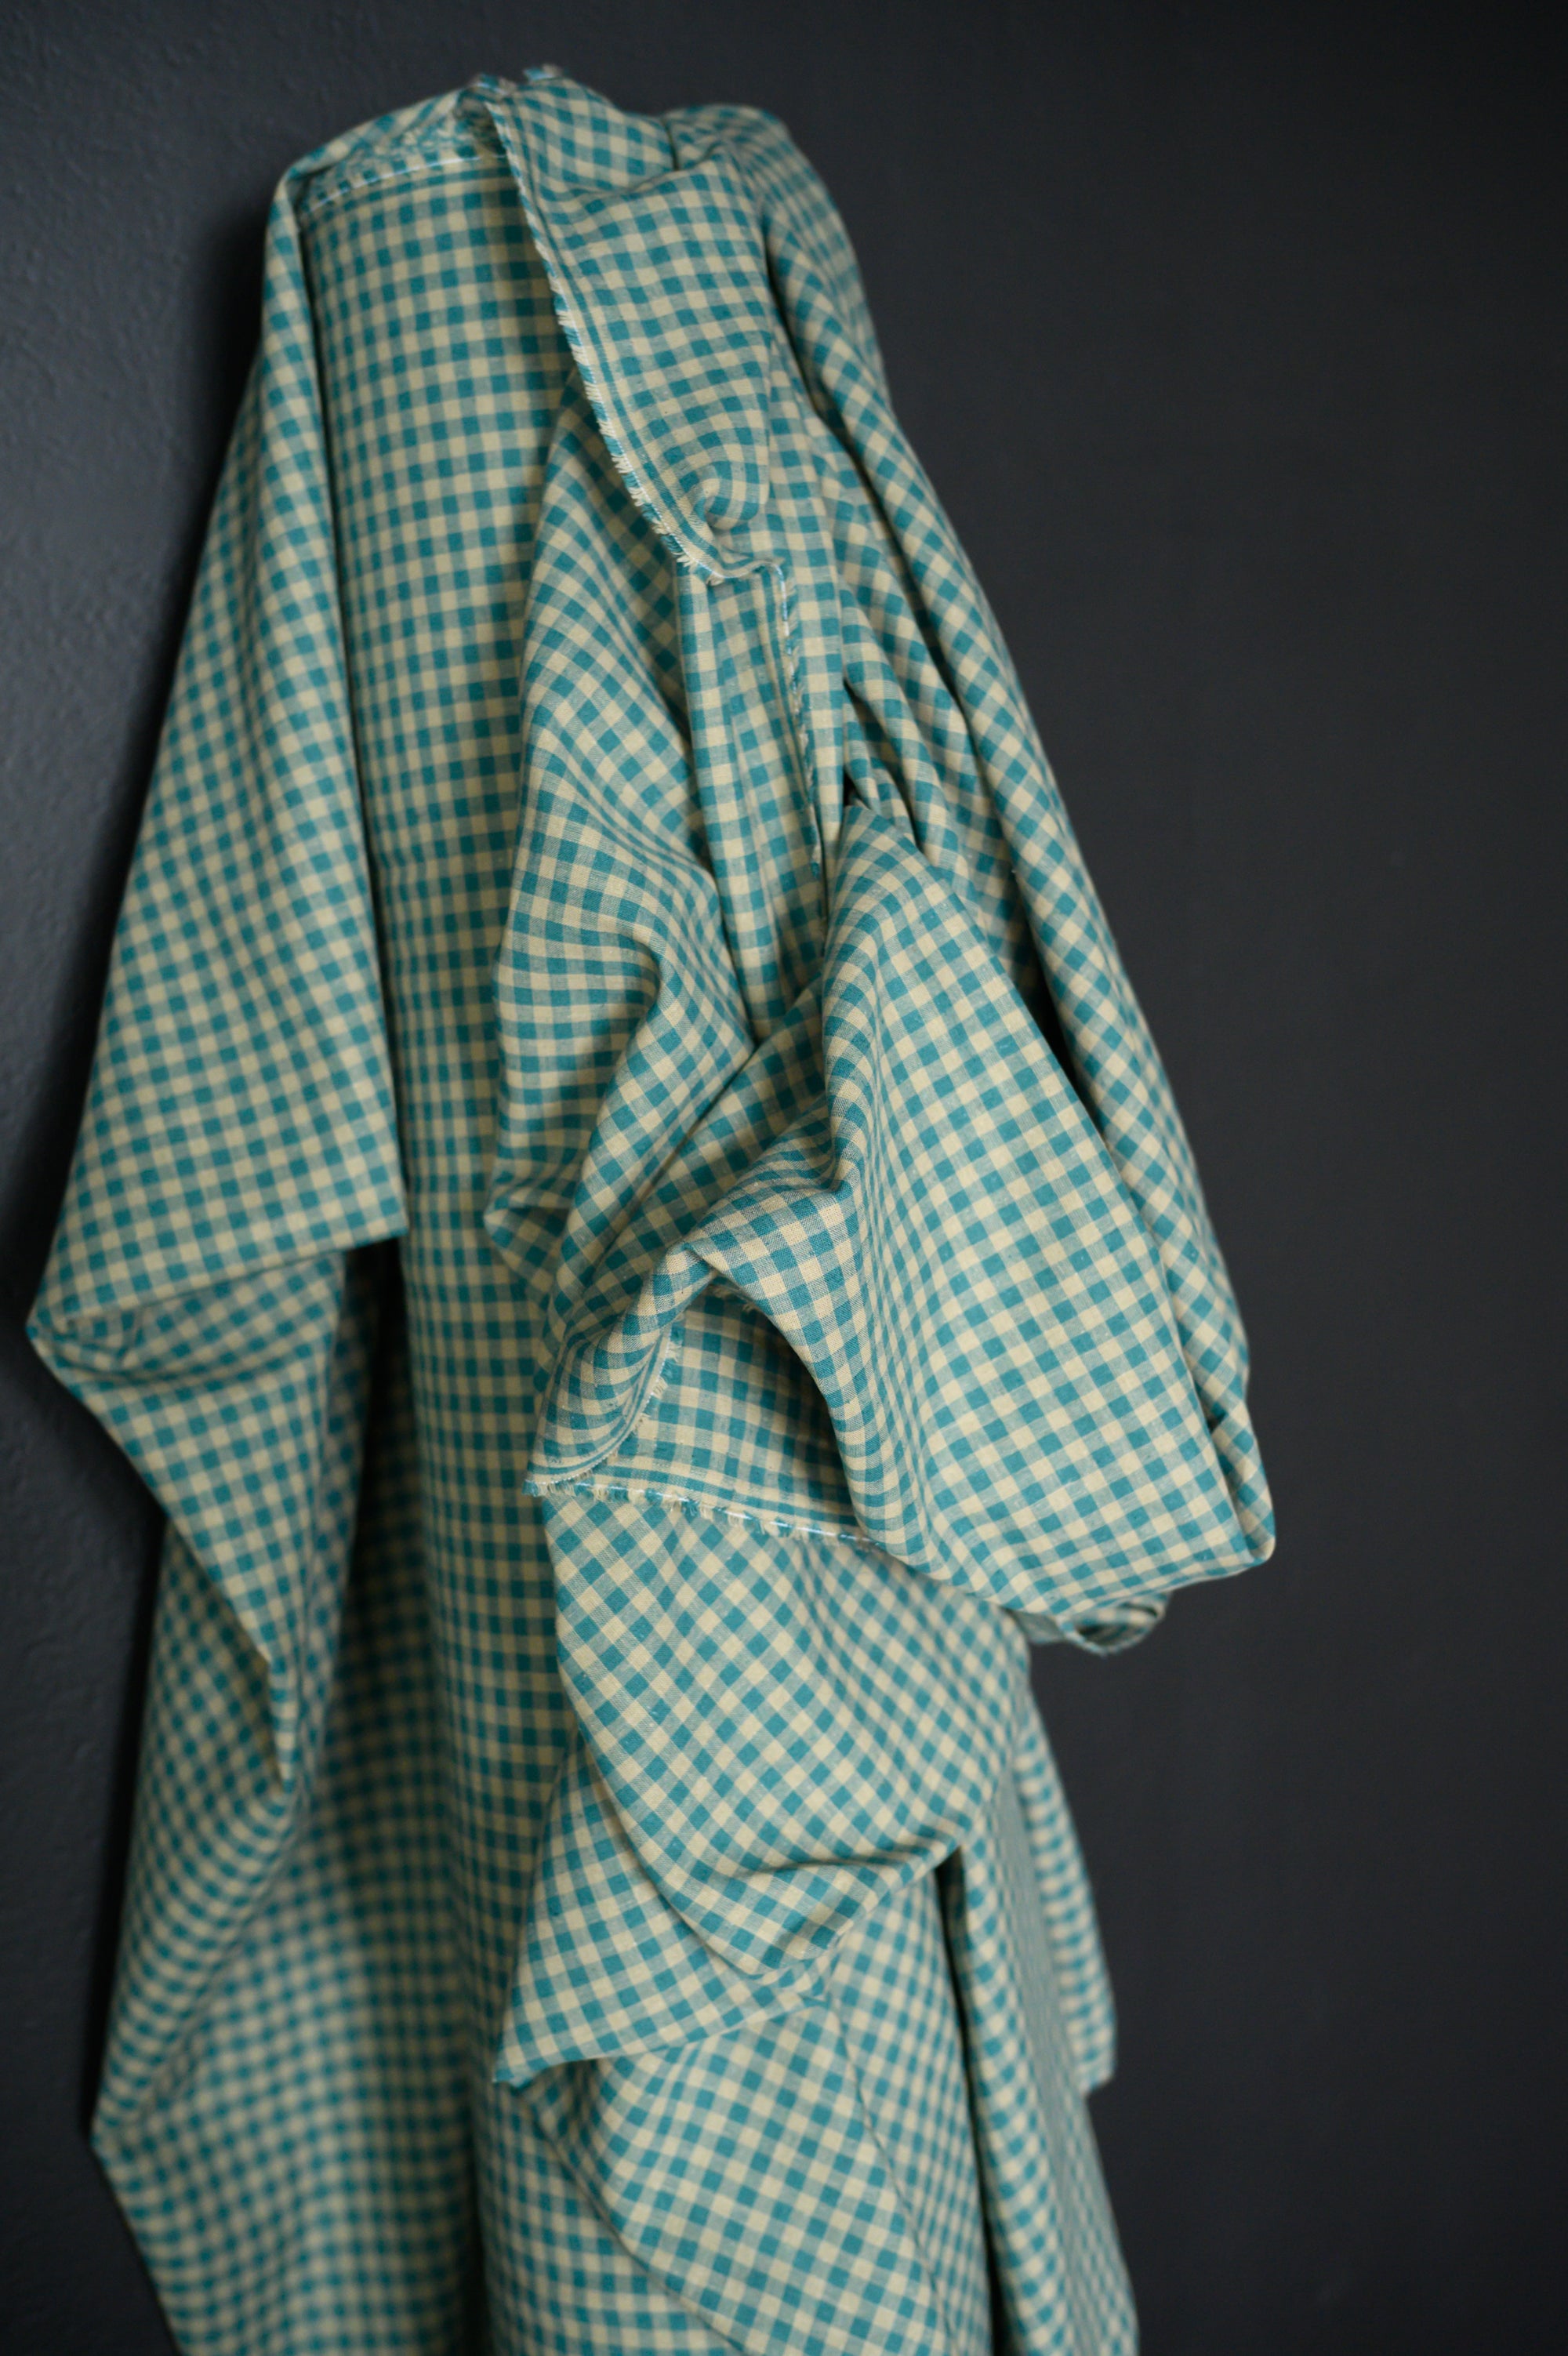 A roll of Teal and tan gingham, cotton/linen blend on a dark grey background.